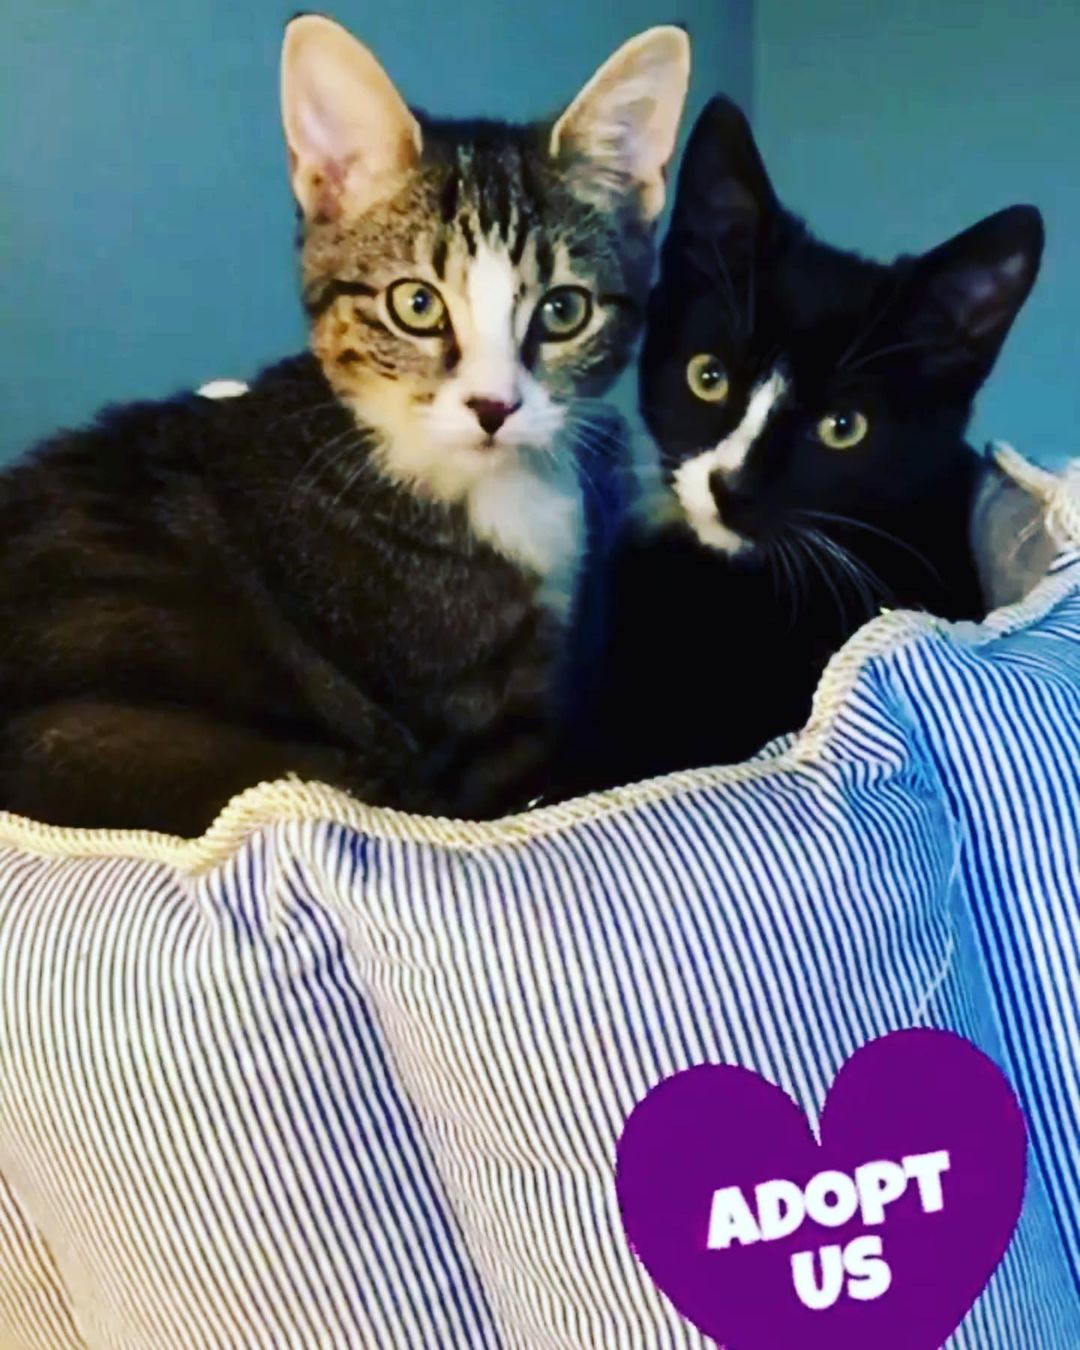 It’s time to find these sweet babies their furever homes: Meet the girls, Fig & Newton.  NEWTON is the black & white kitten and FIG is the tabby kitten. They’re 4 months old & ready to come home with you! Apply to meet/adopt them via link in bio…our app is NO-OBLIGATION 😽 What are you waiting for? 💗💗

<a target='_blank' href='https://www.instagram.com/explore/tags/forgottencats/'>#forgottencats</a> <a target='_blank' href='https://www.instagram.com/explore/tags/adoptablekittensofinstagram/'>#adoptablekittensofinstagram</a> <a target='_blank' href='https://www.instagram.com/explore/tags/adoptablekittens/'>#adoptablekittens</a>